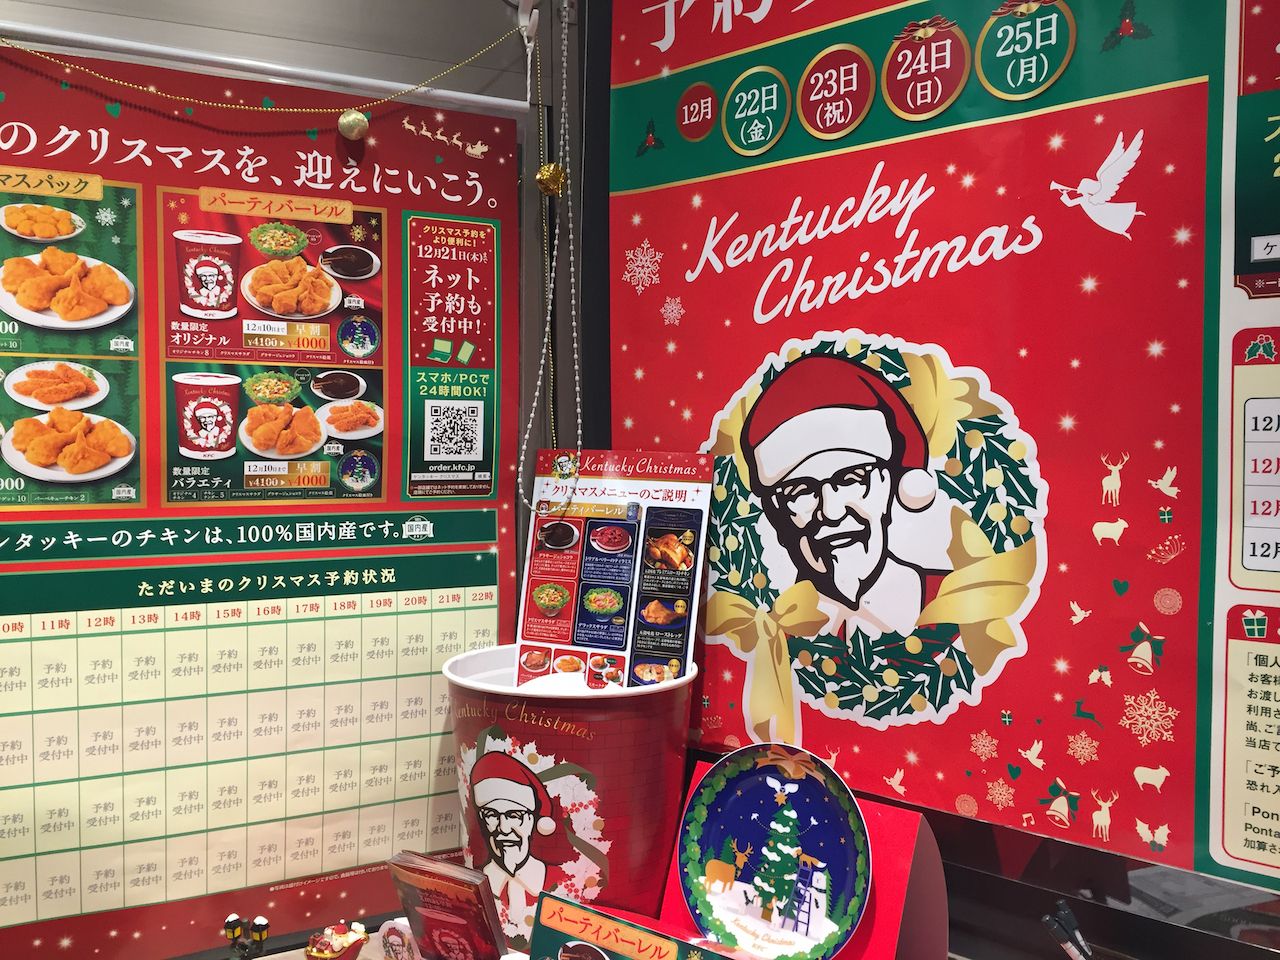 Promotional Kentucky Fried Chicken Christmas materials on display in Japan